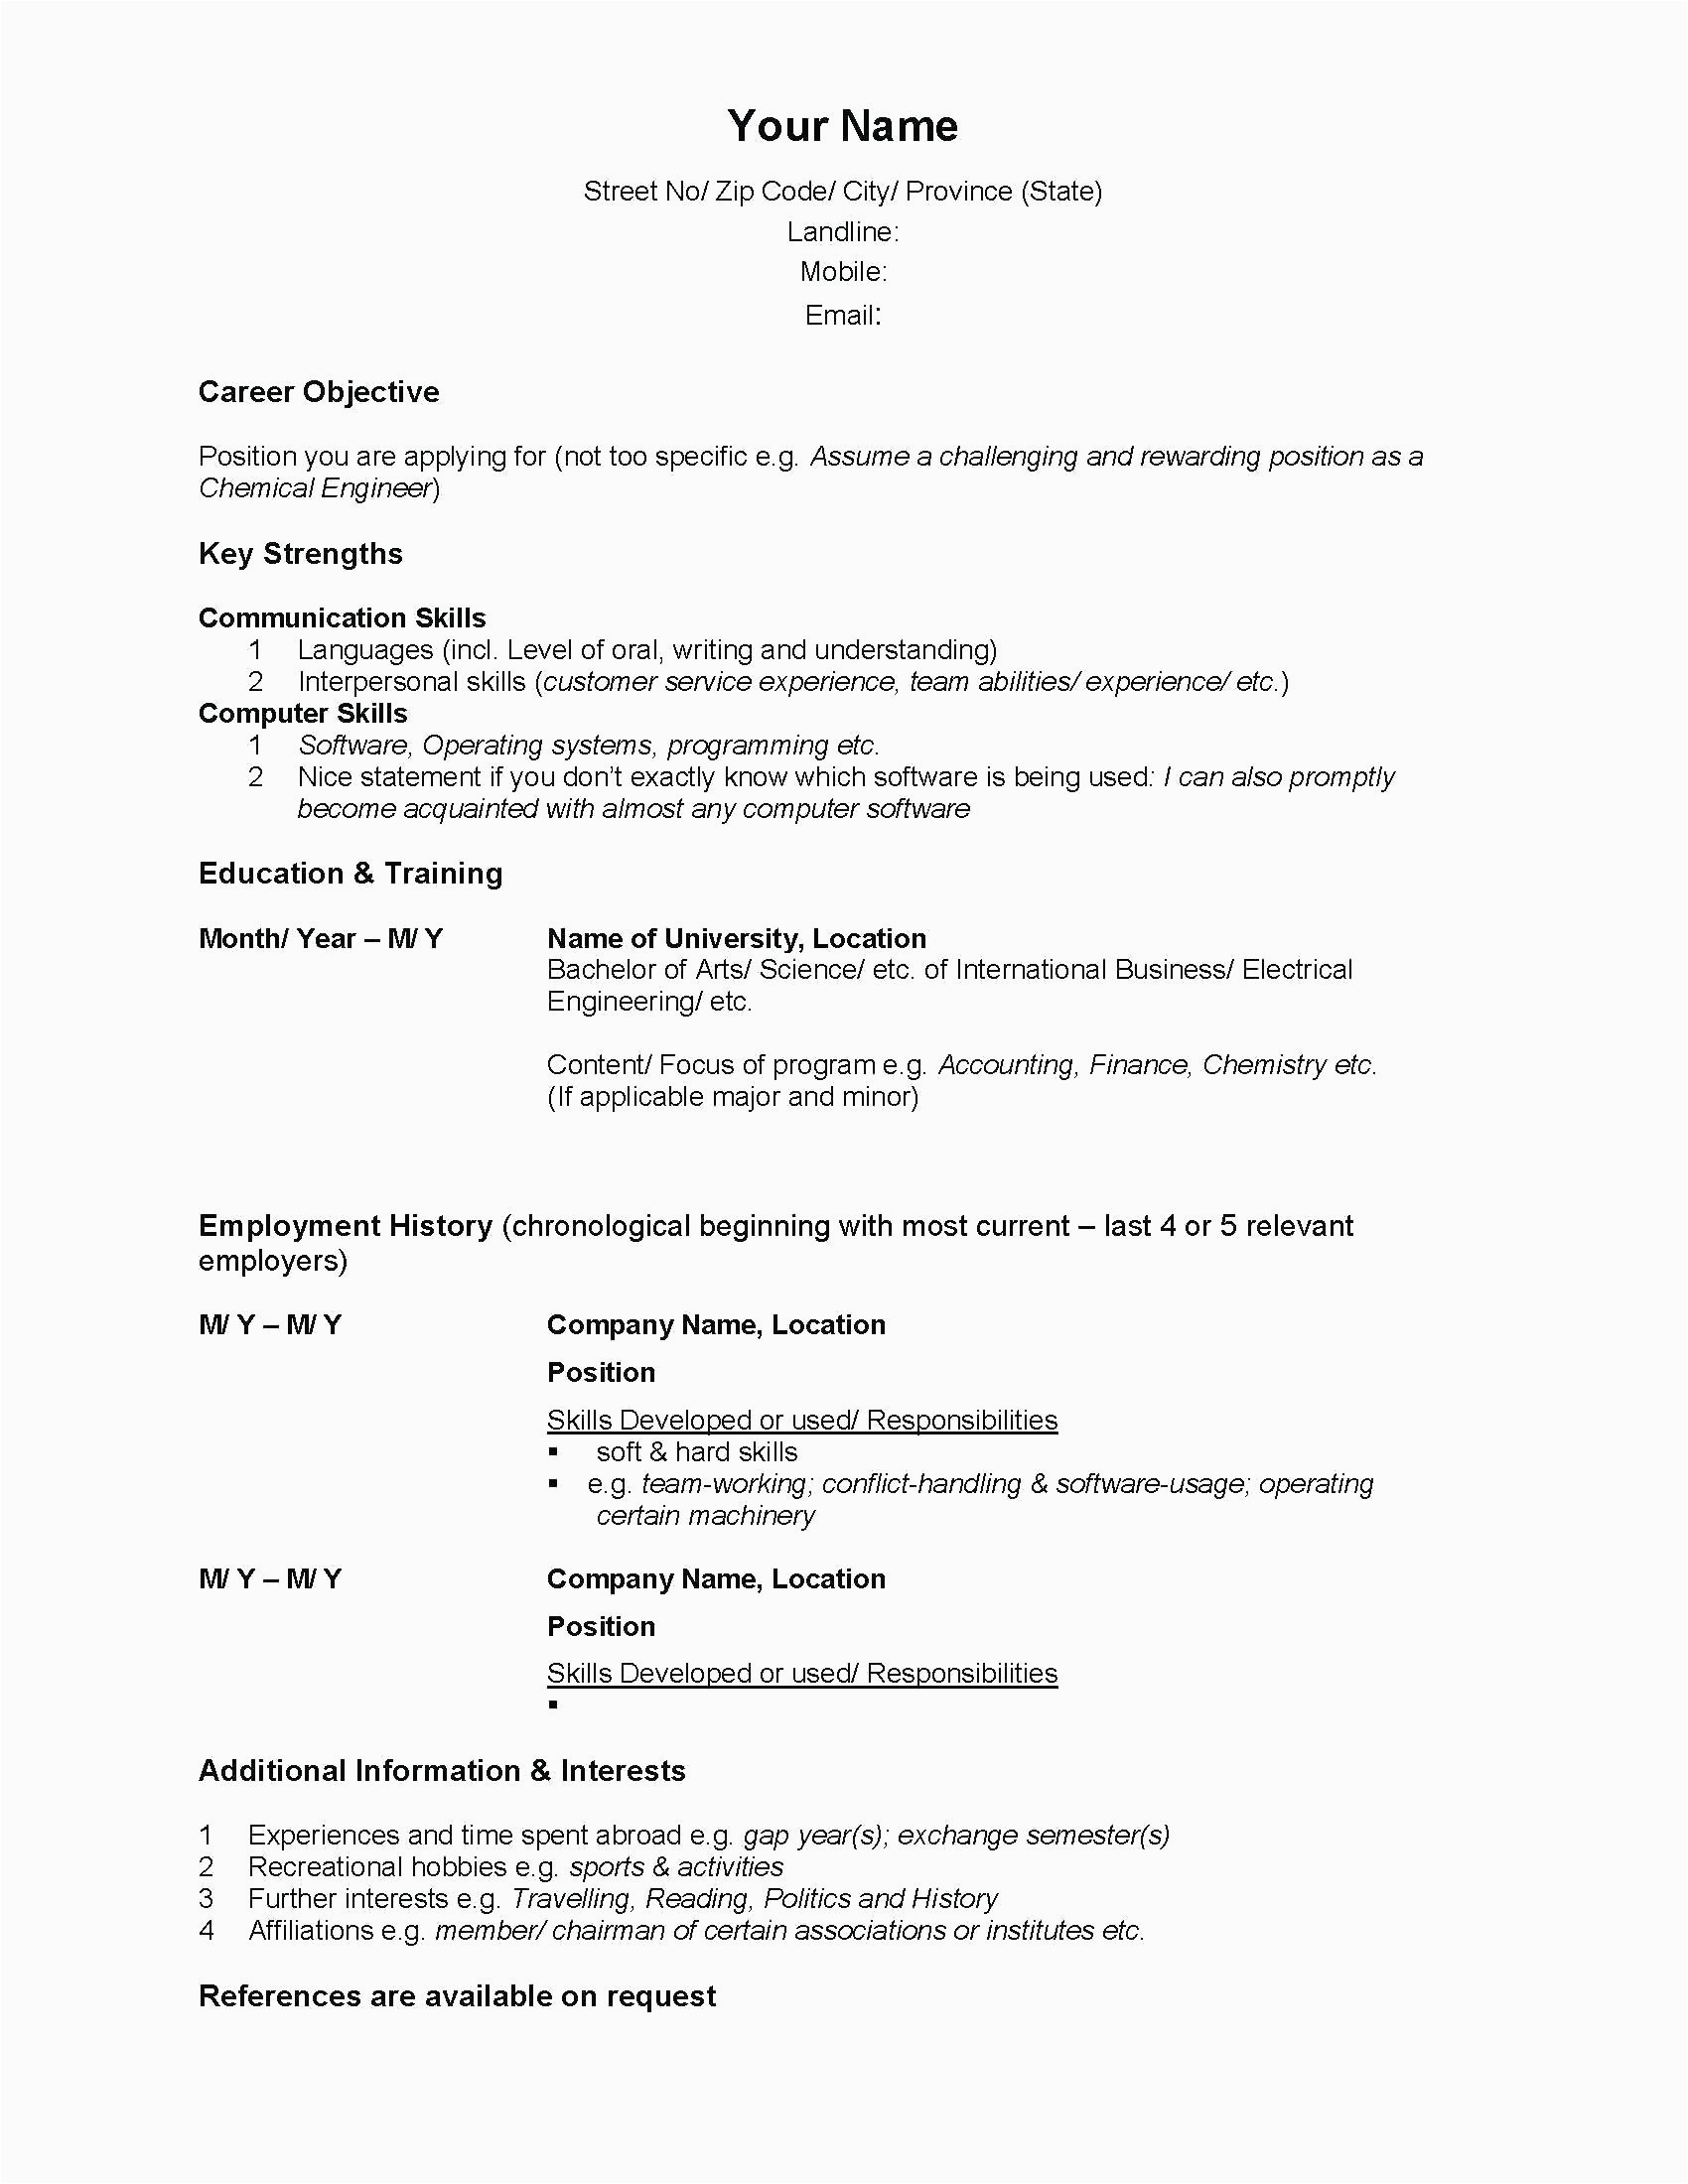 Sample Of Special Skills and Interest In Resume 12 Resume Skills and Interests Examples Radaircars